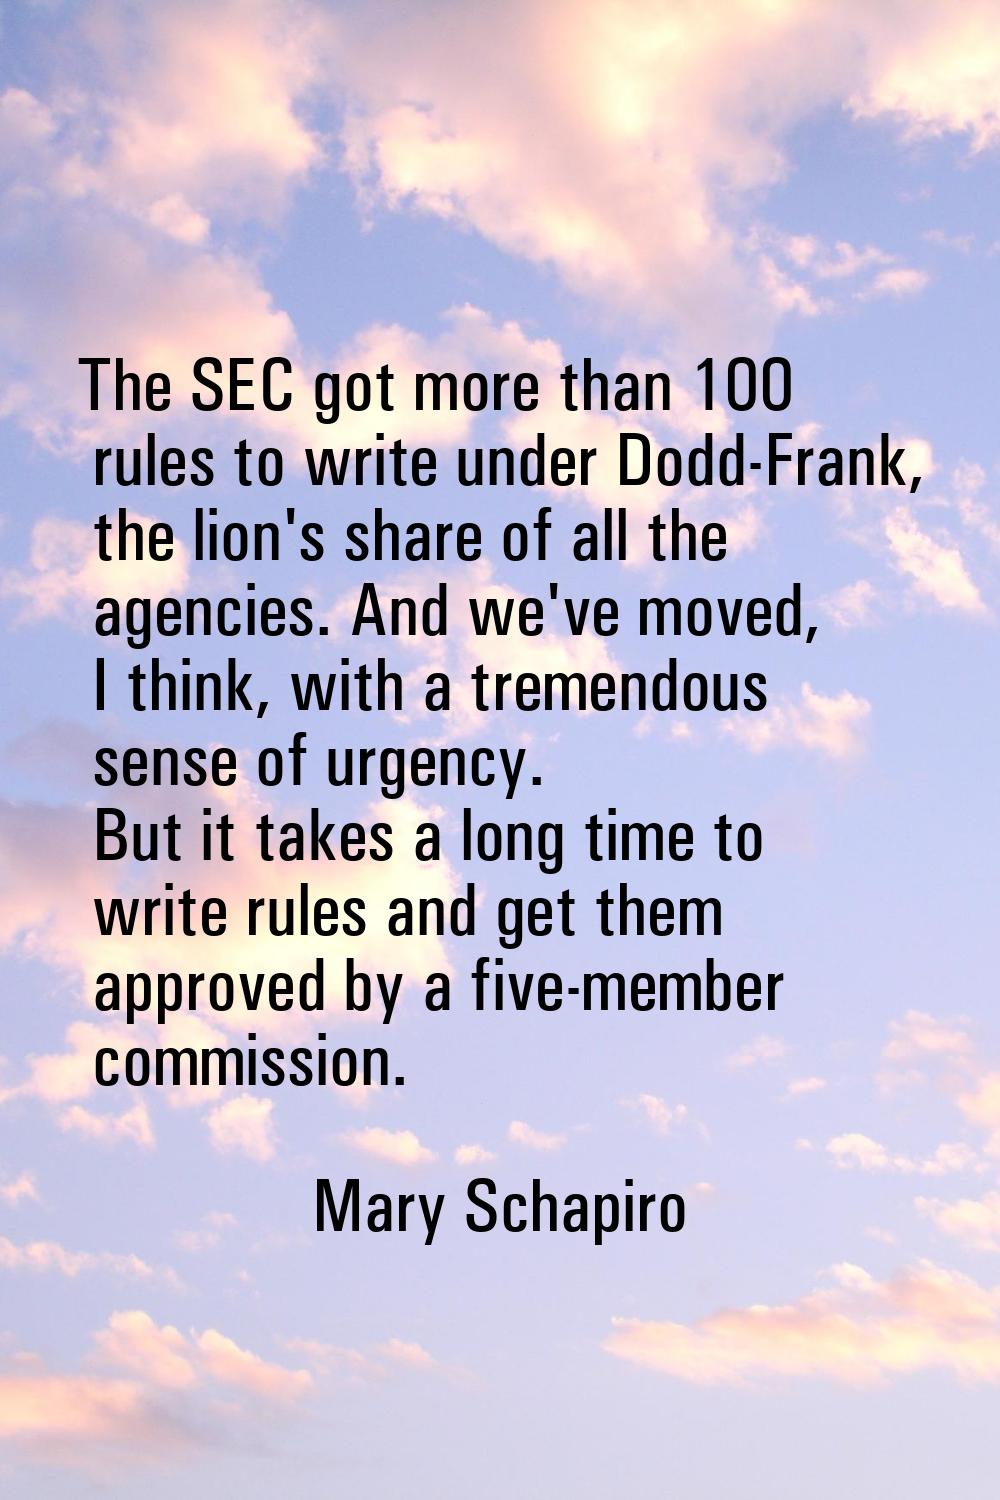 The SEC got more than 100 rules to write under Dodd-Frank, the lion's share of all the agencies. An